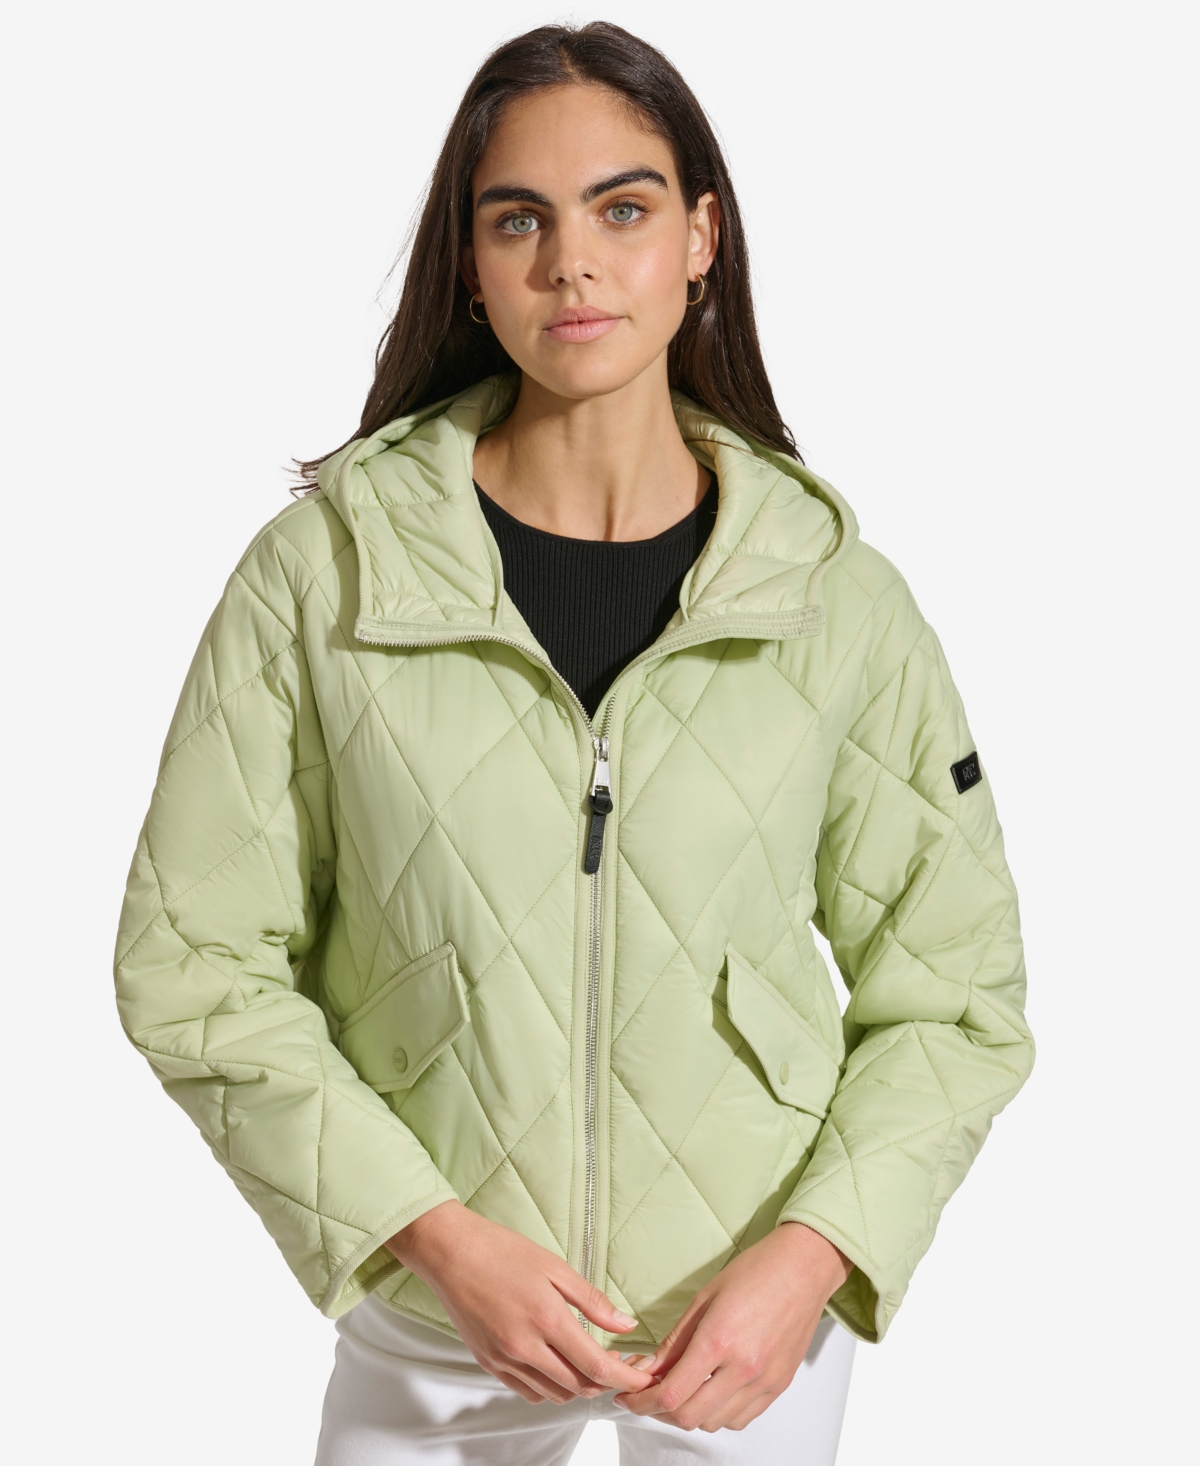 Dkny Women's Cropped Hooded Diamond Quilted Coat In Celadon